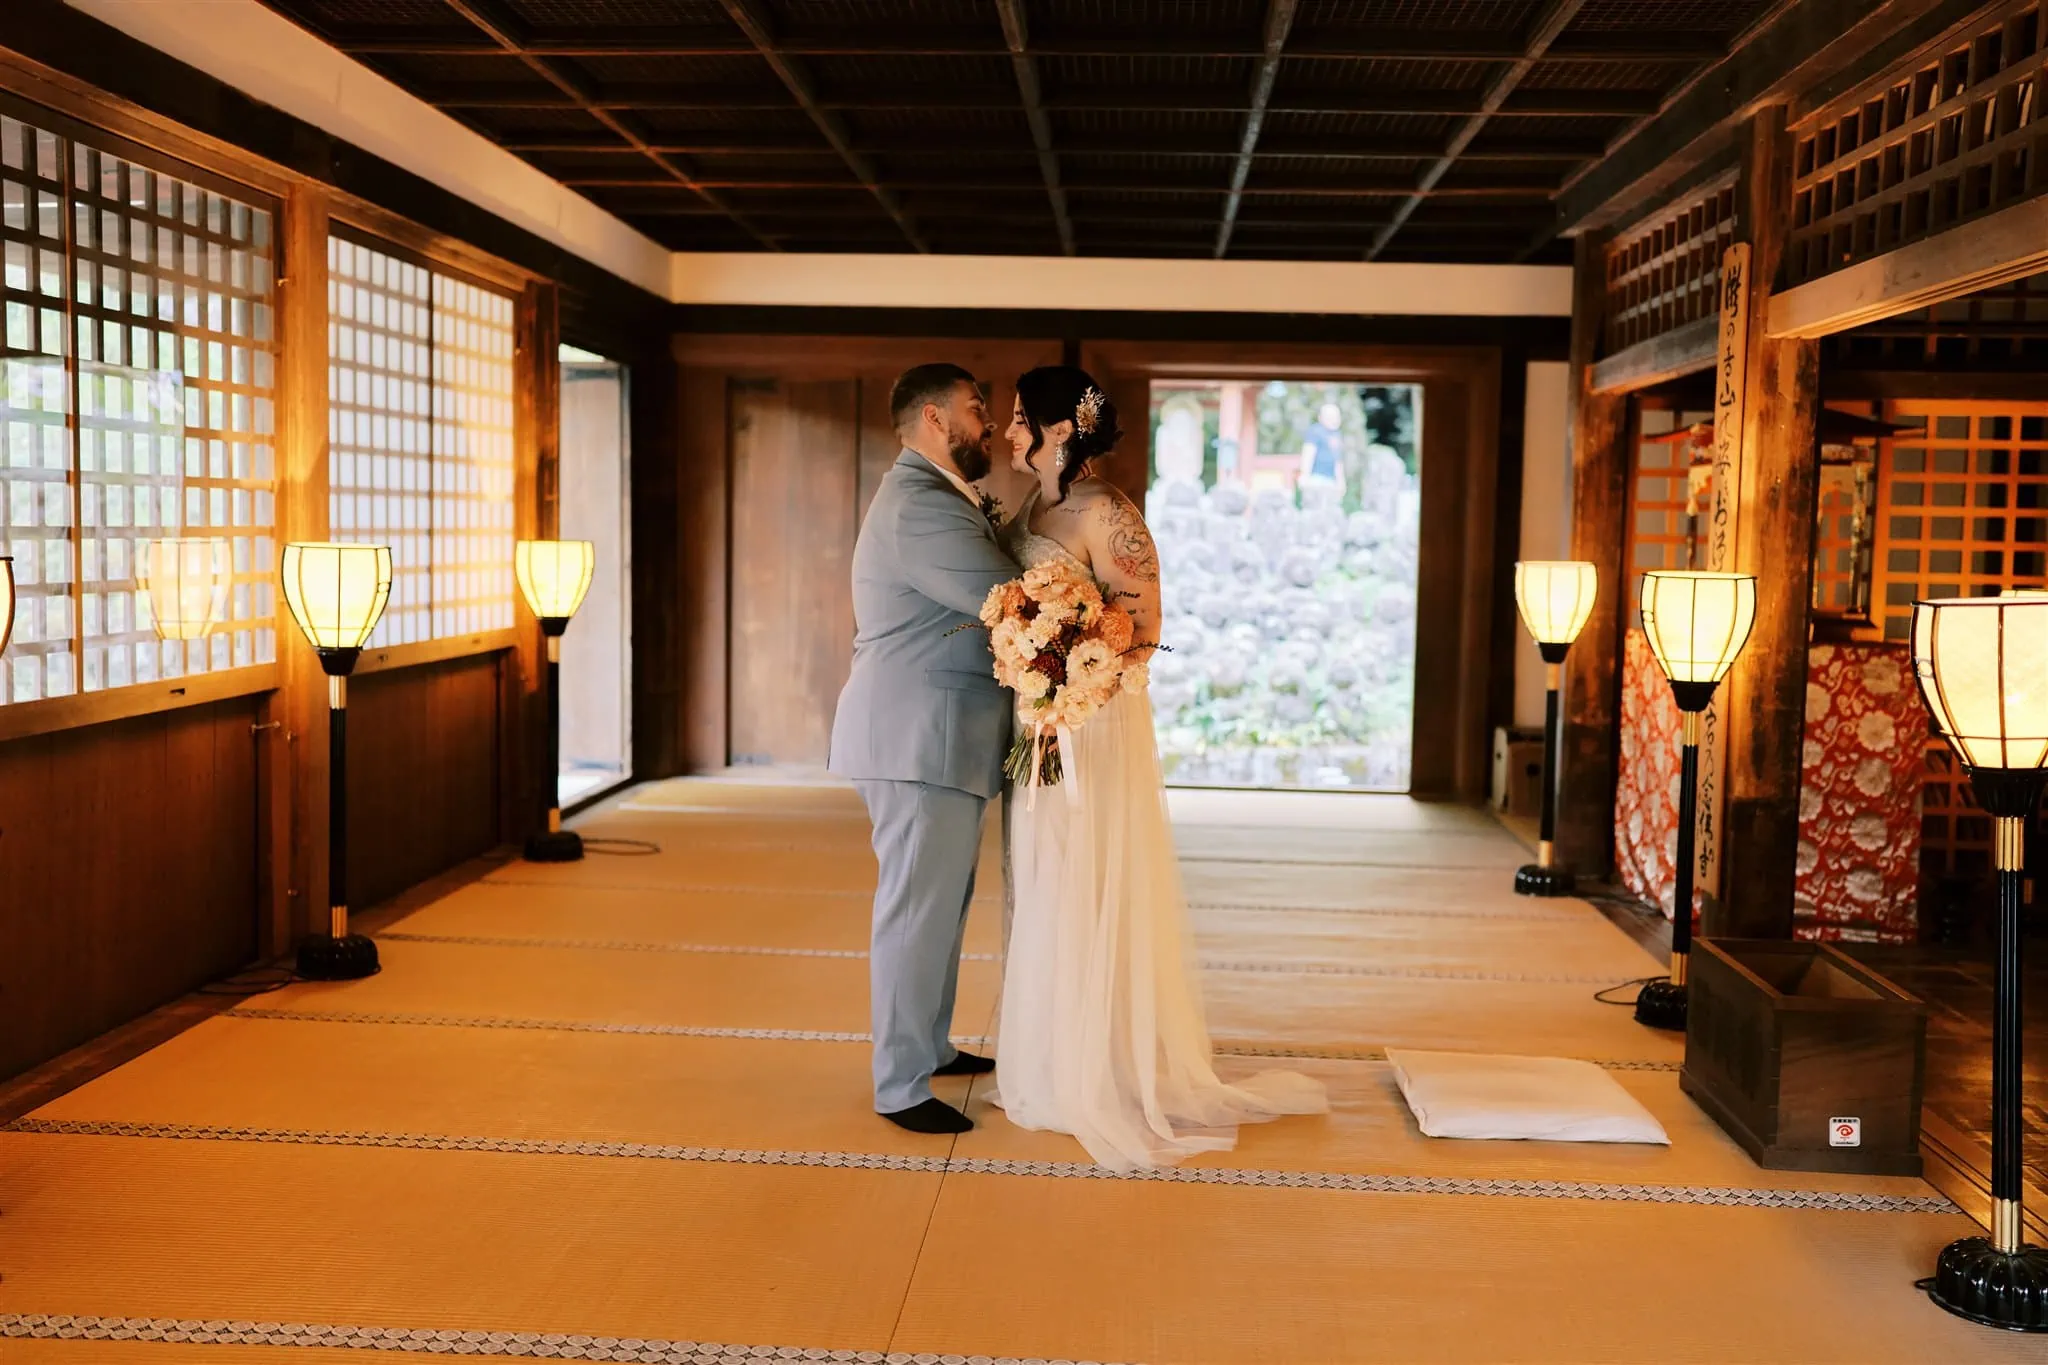 Kyoto Tokyo Japan Elopement Wedding Photographer, Planner & Videographer | A photographer capturing a bride and groom kissing during their Japan elopement in a traditional Japanese room.